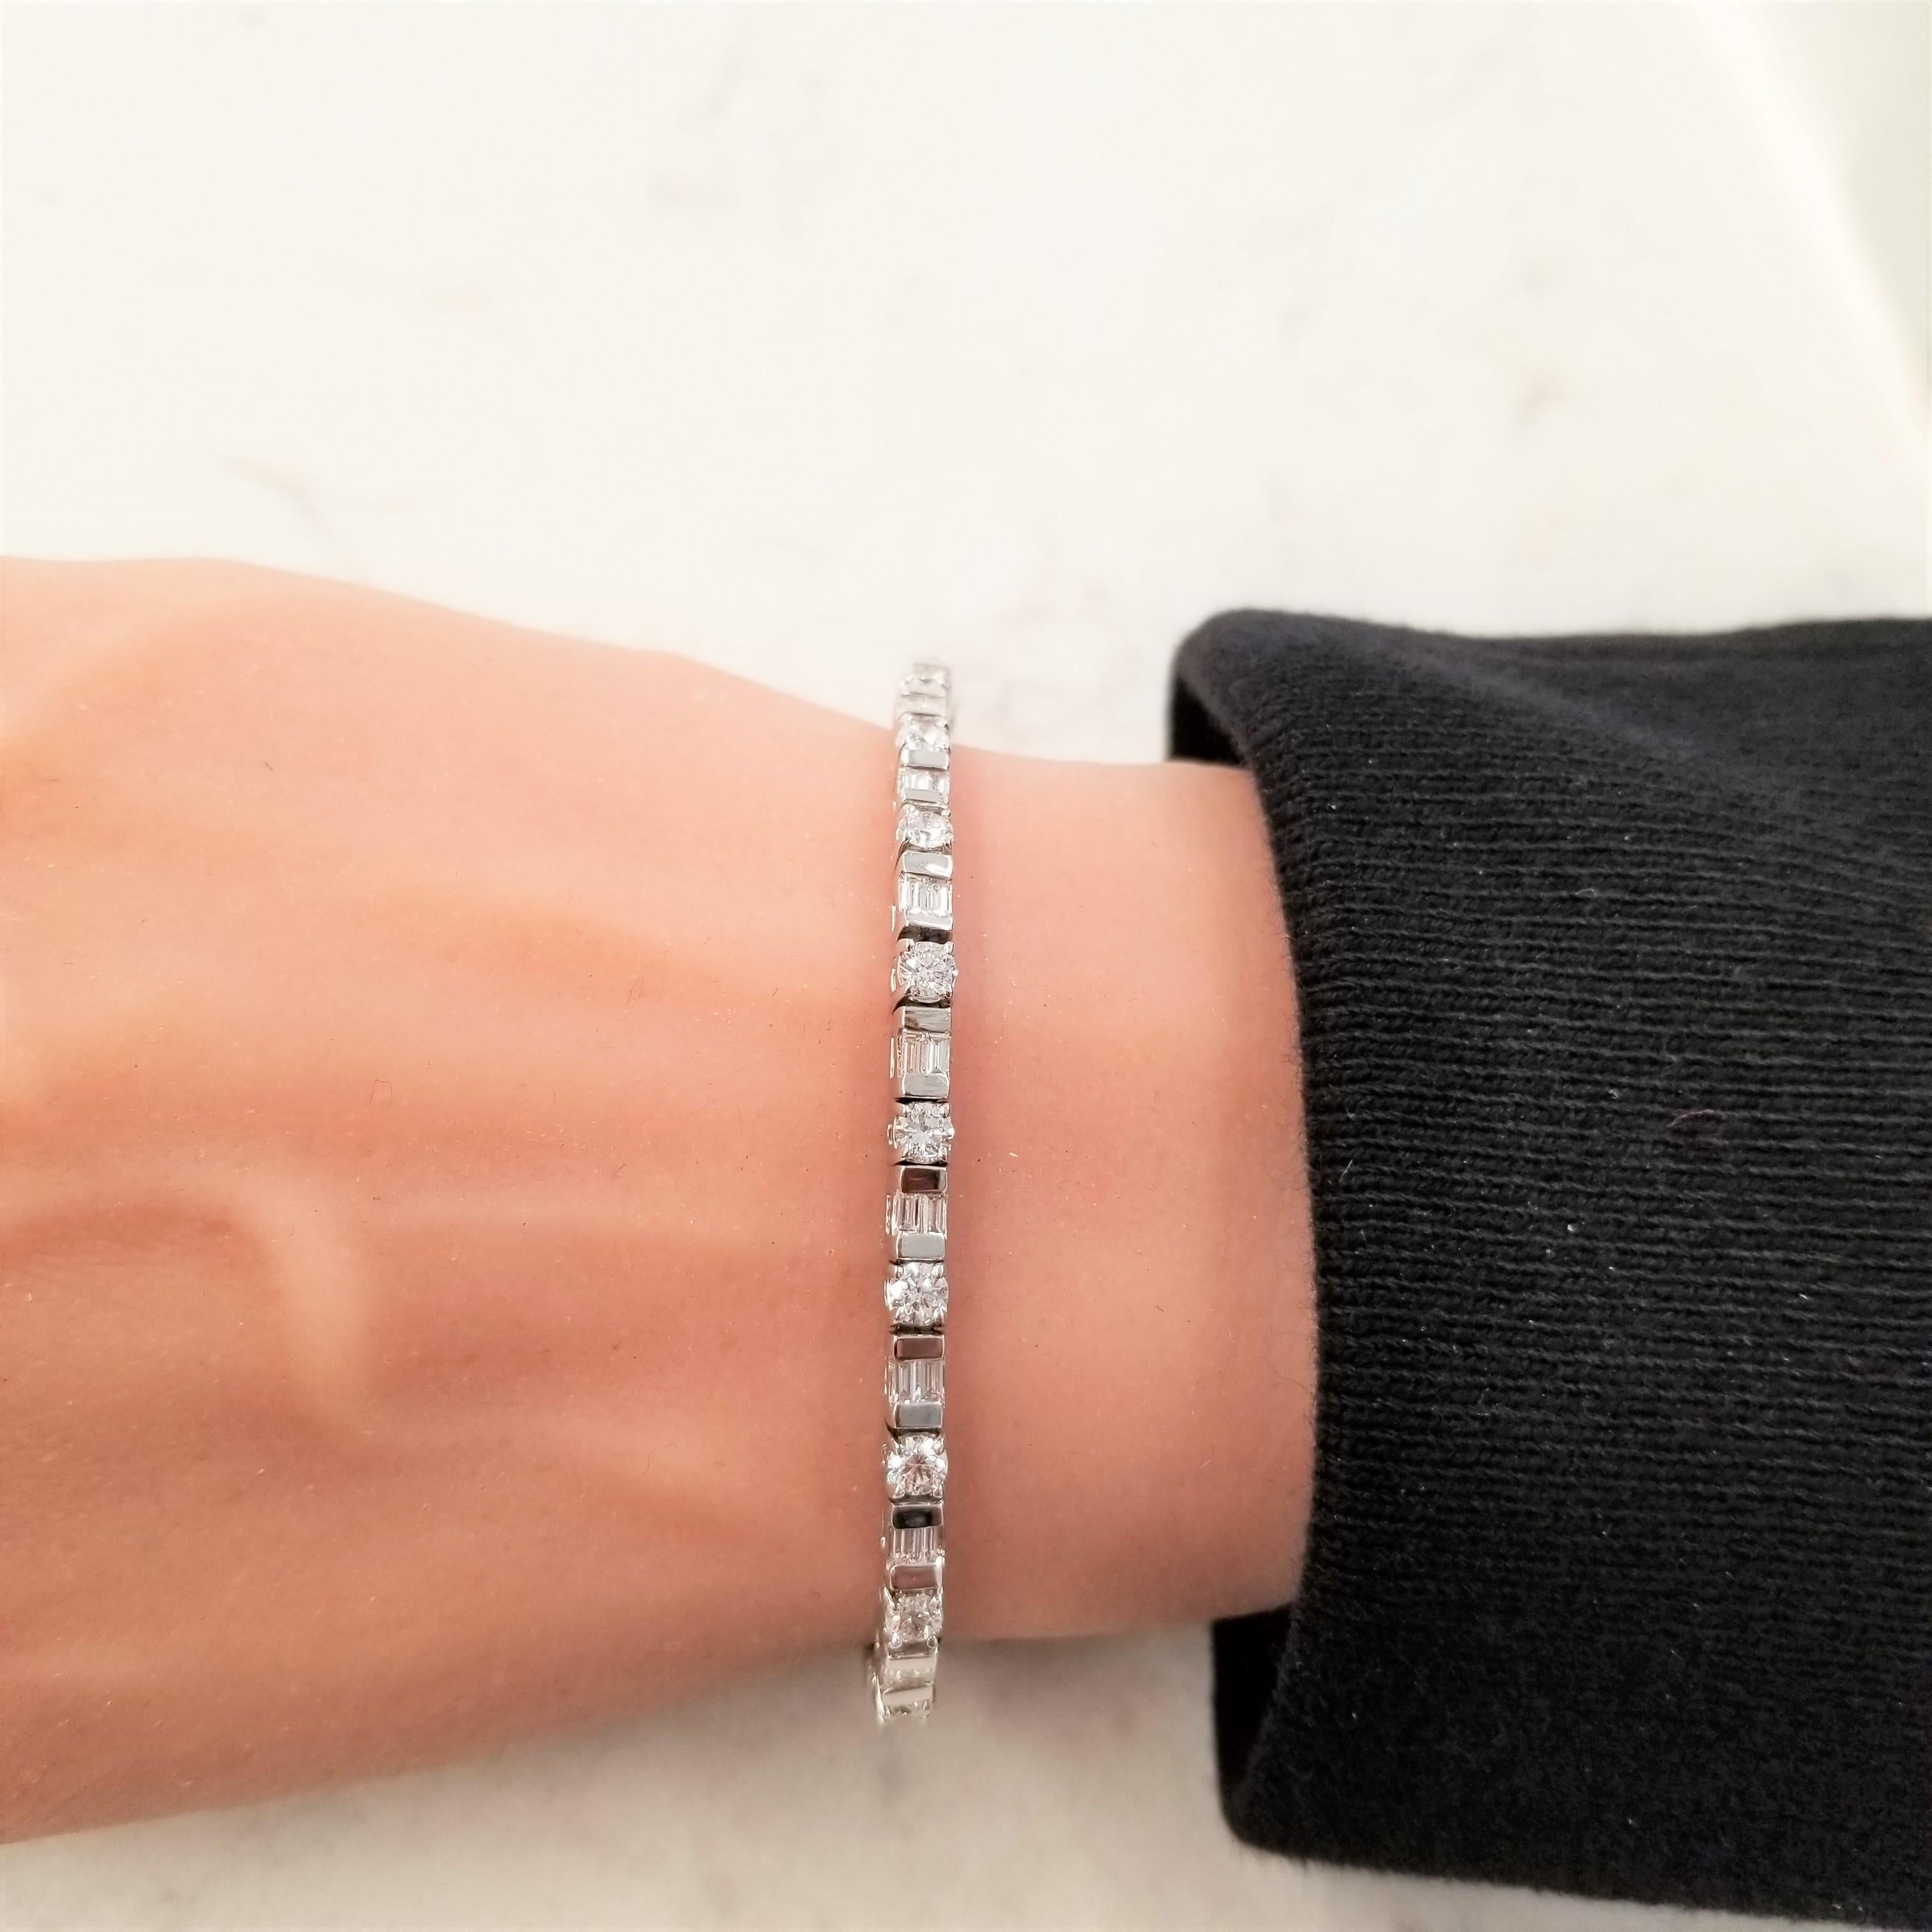 This bracelet is brimming with brilliance and contrast! It features fully faceted rounds and contrasting step-cut baguette diamonds that wrap around the wrist in an alternating fashion. There are 21 round diamonds and 42 baguette diamonds hand-set